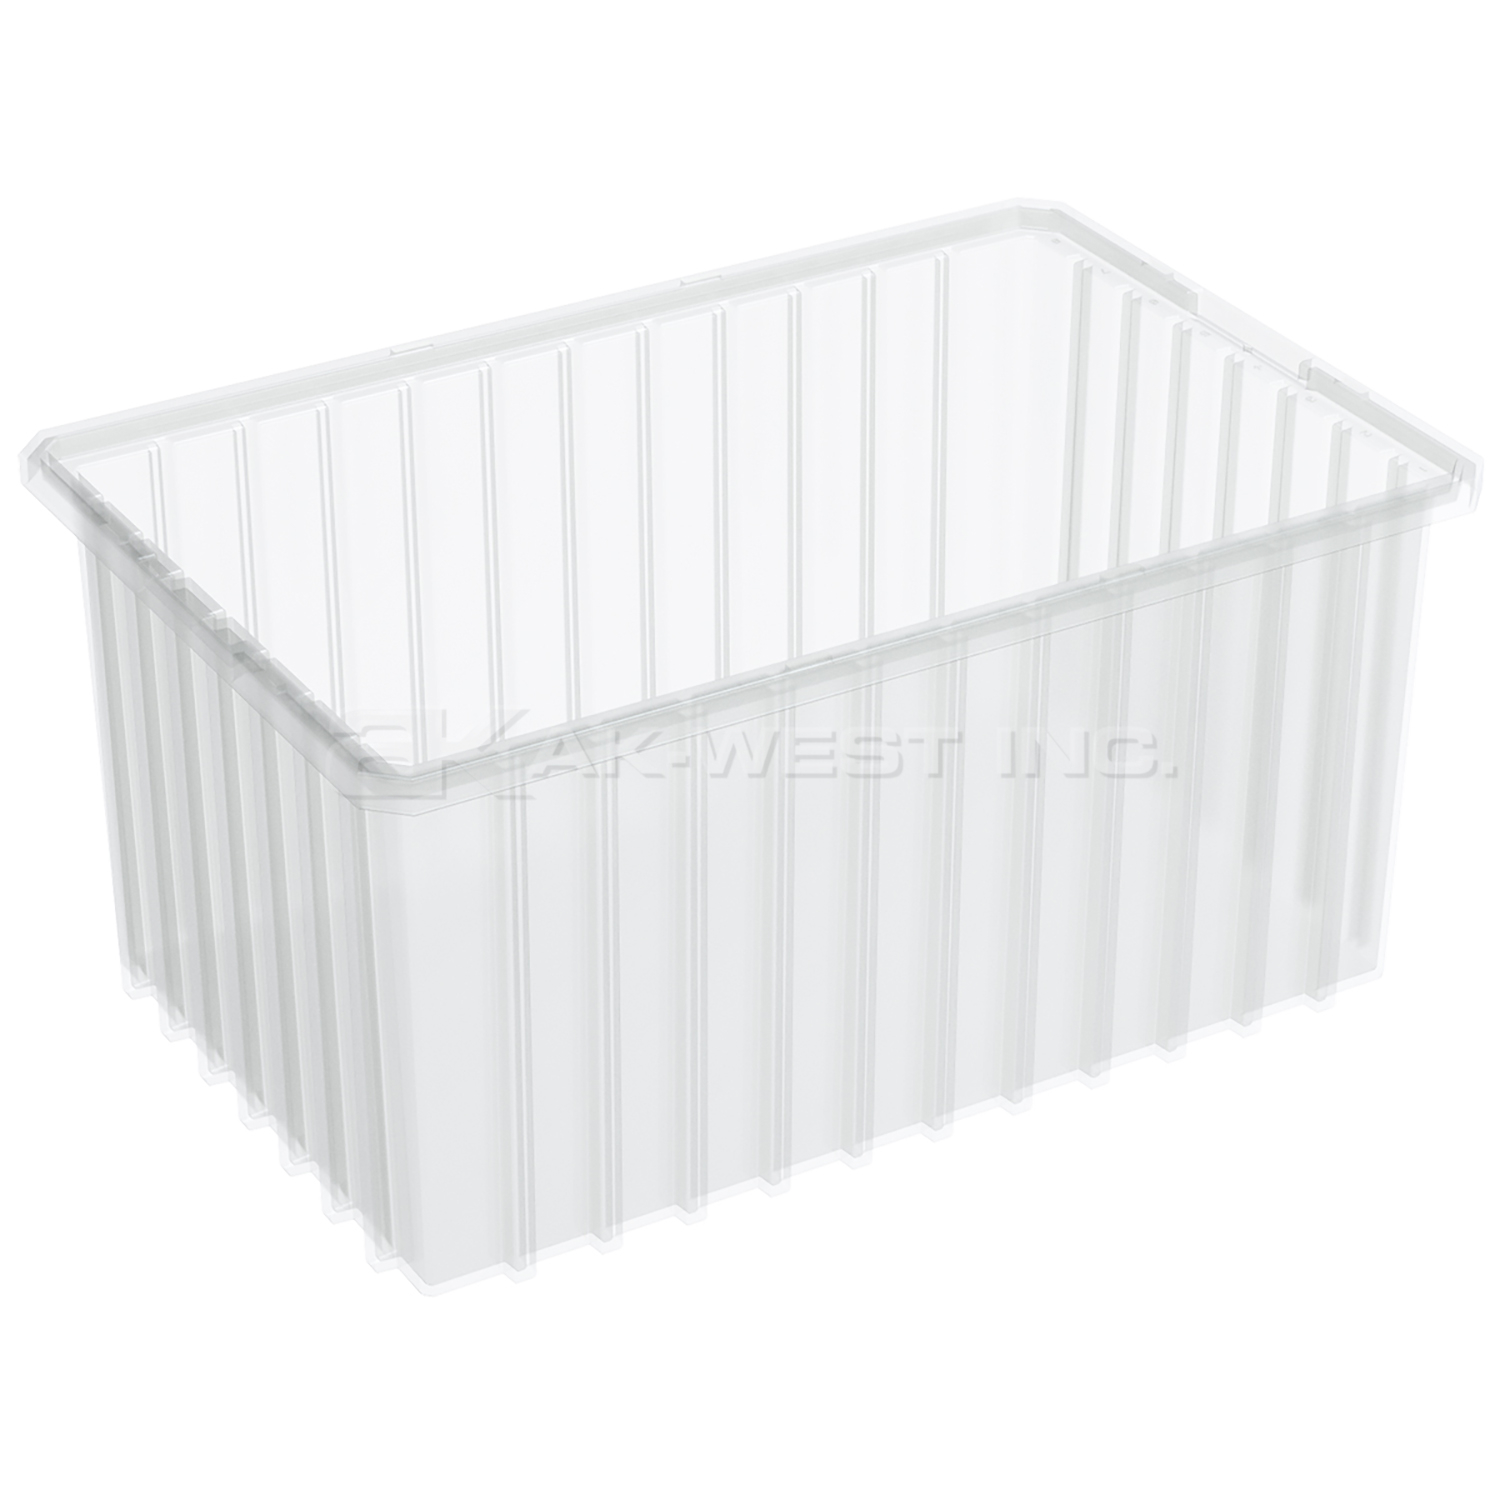 Clear, 16-1/2" x 10-7/8" x 8" Dividable Grid Container (6 Per Carton)